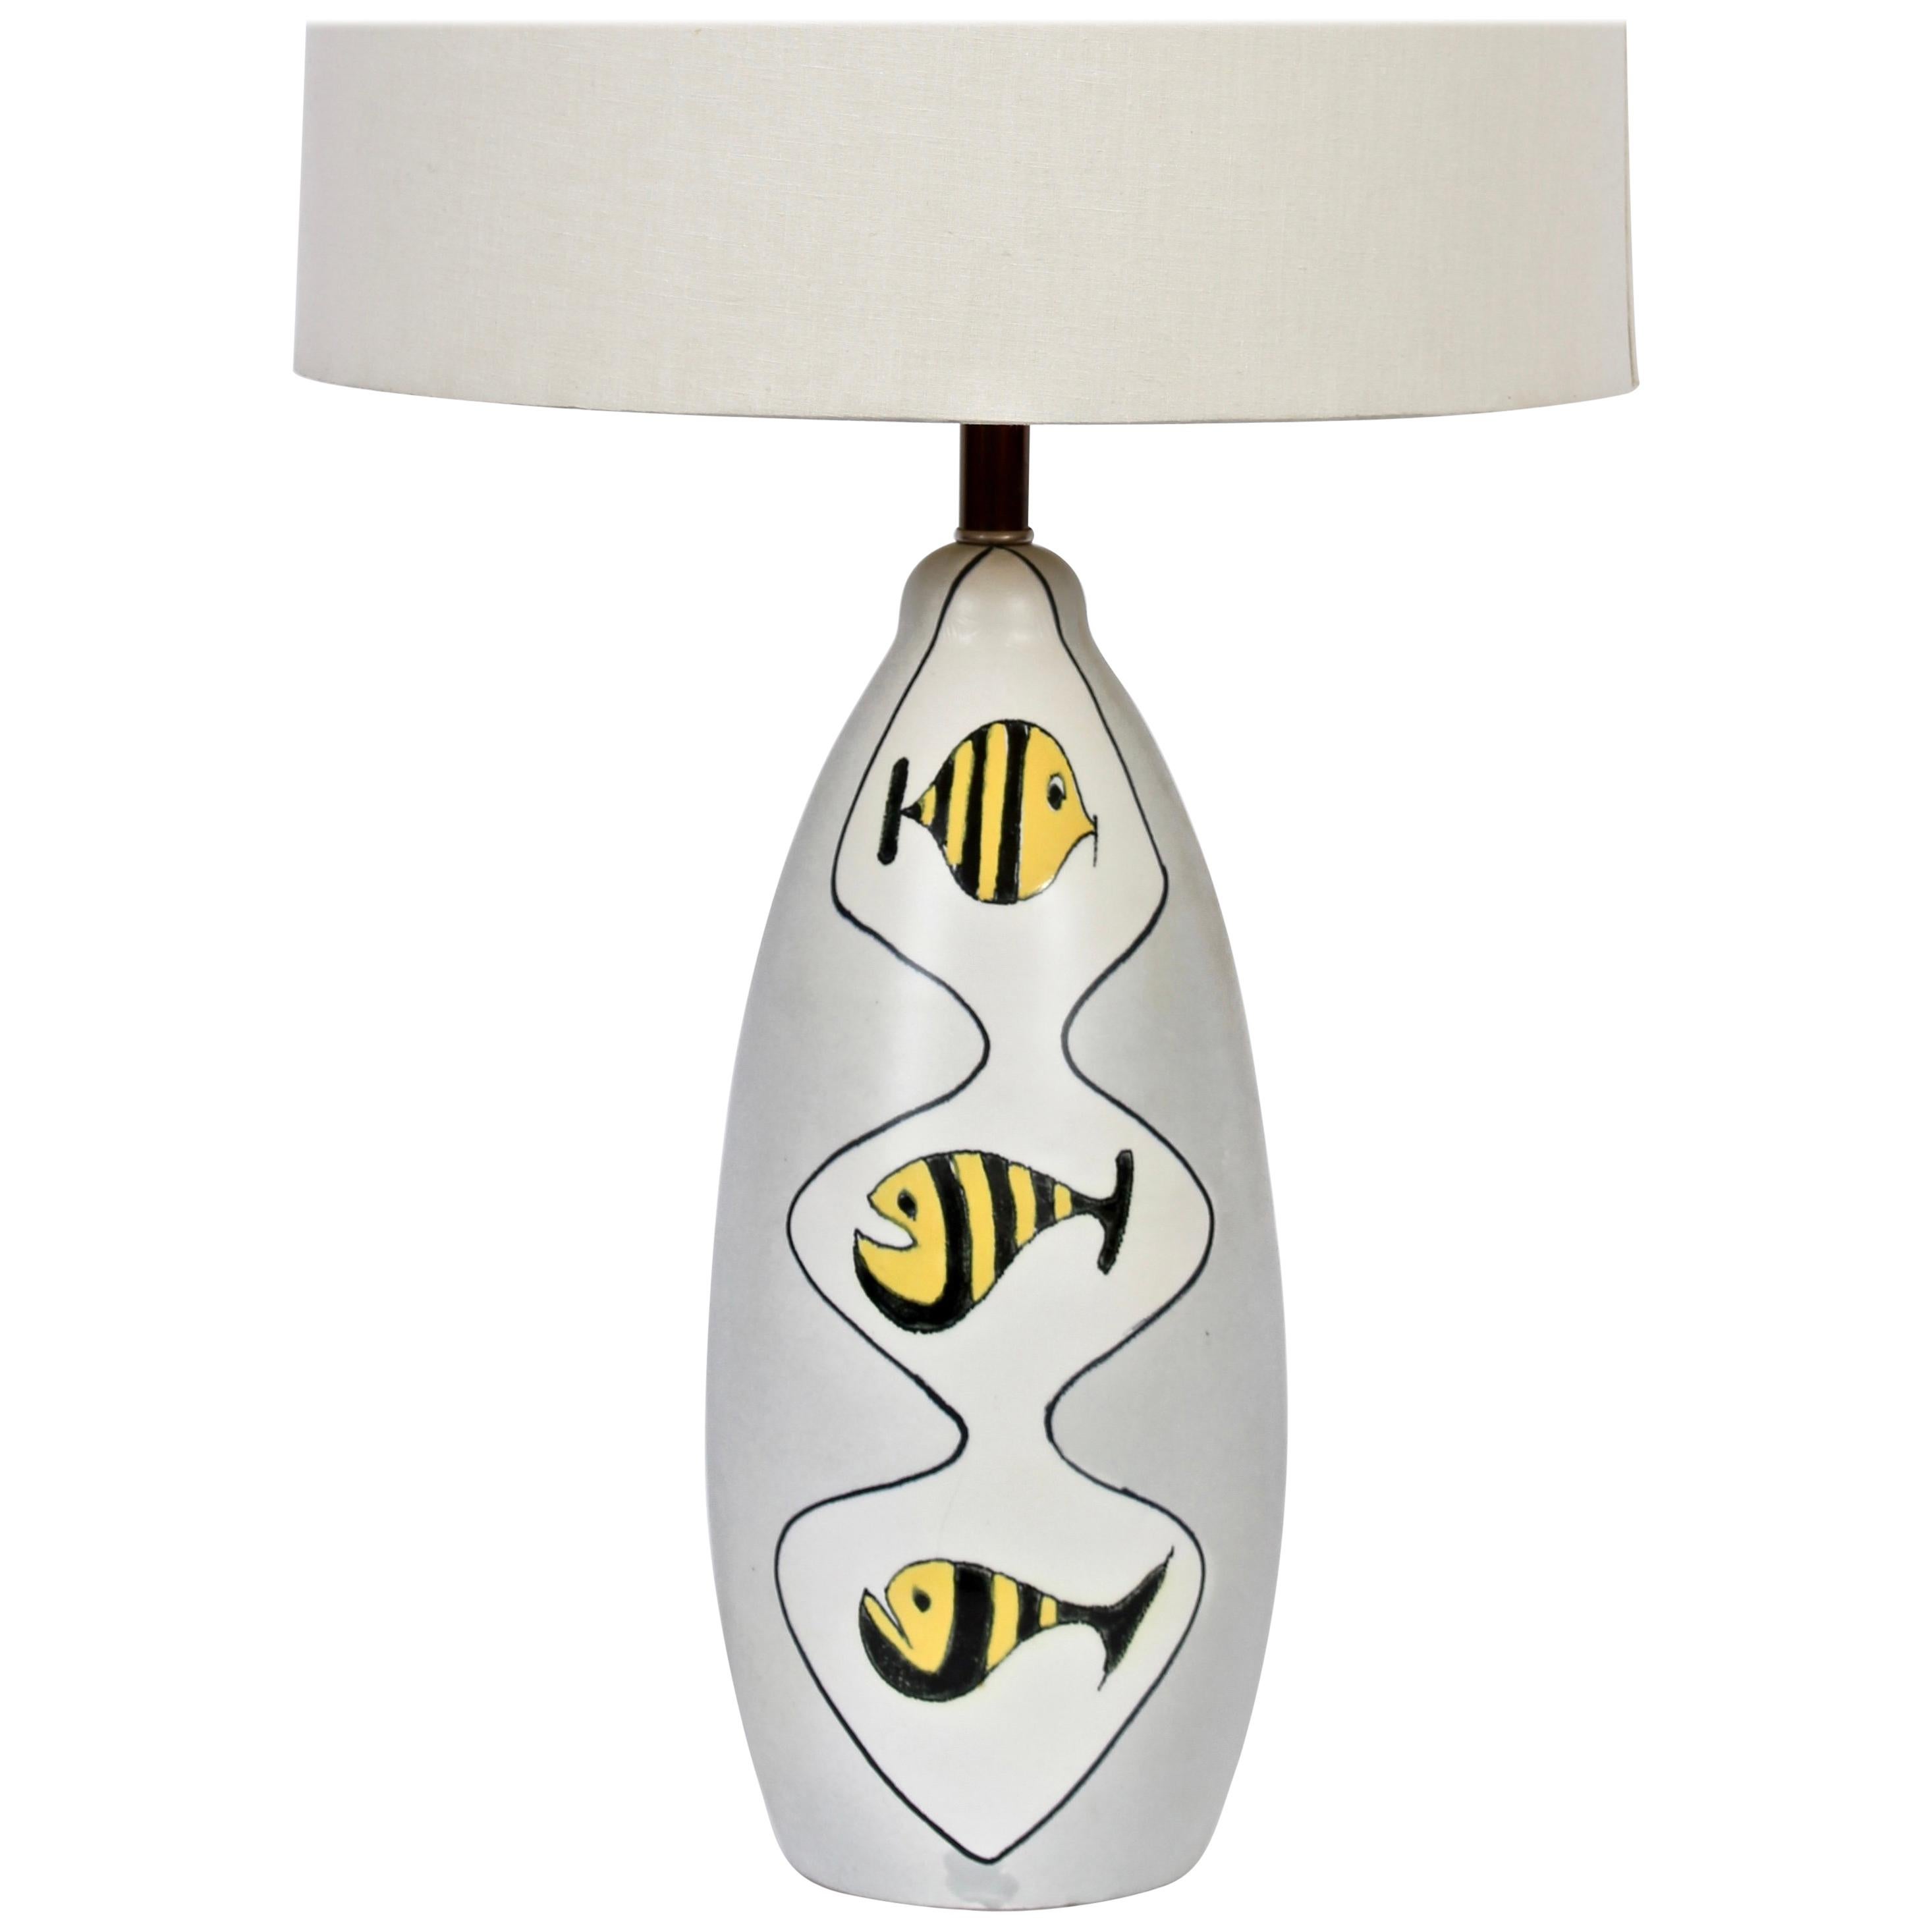 Italian Modern Bitossi attributed bumblebee fish matte gray glazed pottery table lamp. Featuring hand painted black lined white encased background with a stacked trio of yellow and black striped fish. Shade shown for display only and not for sale